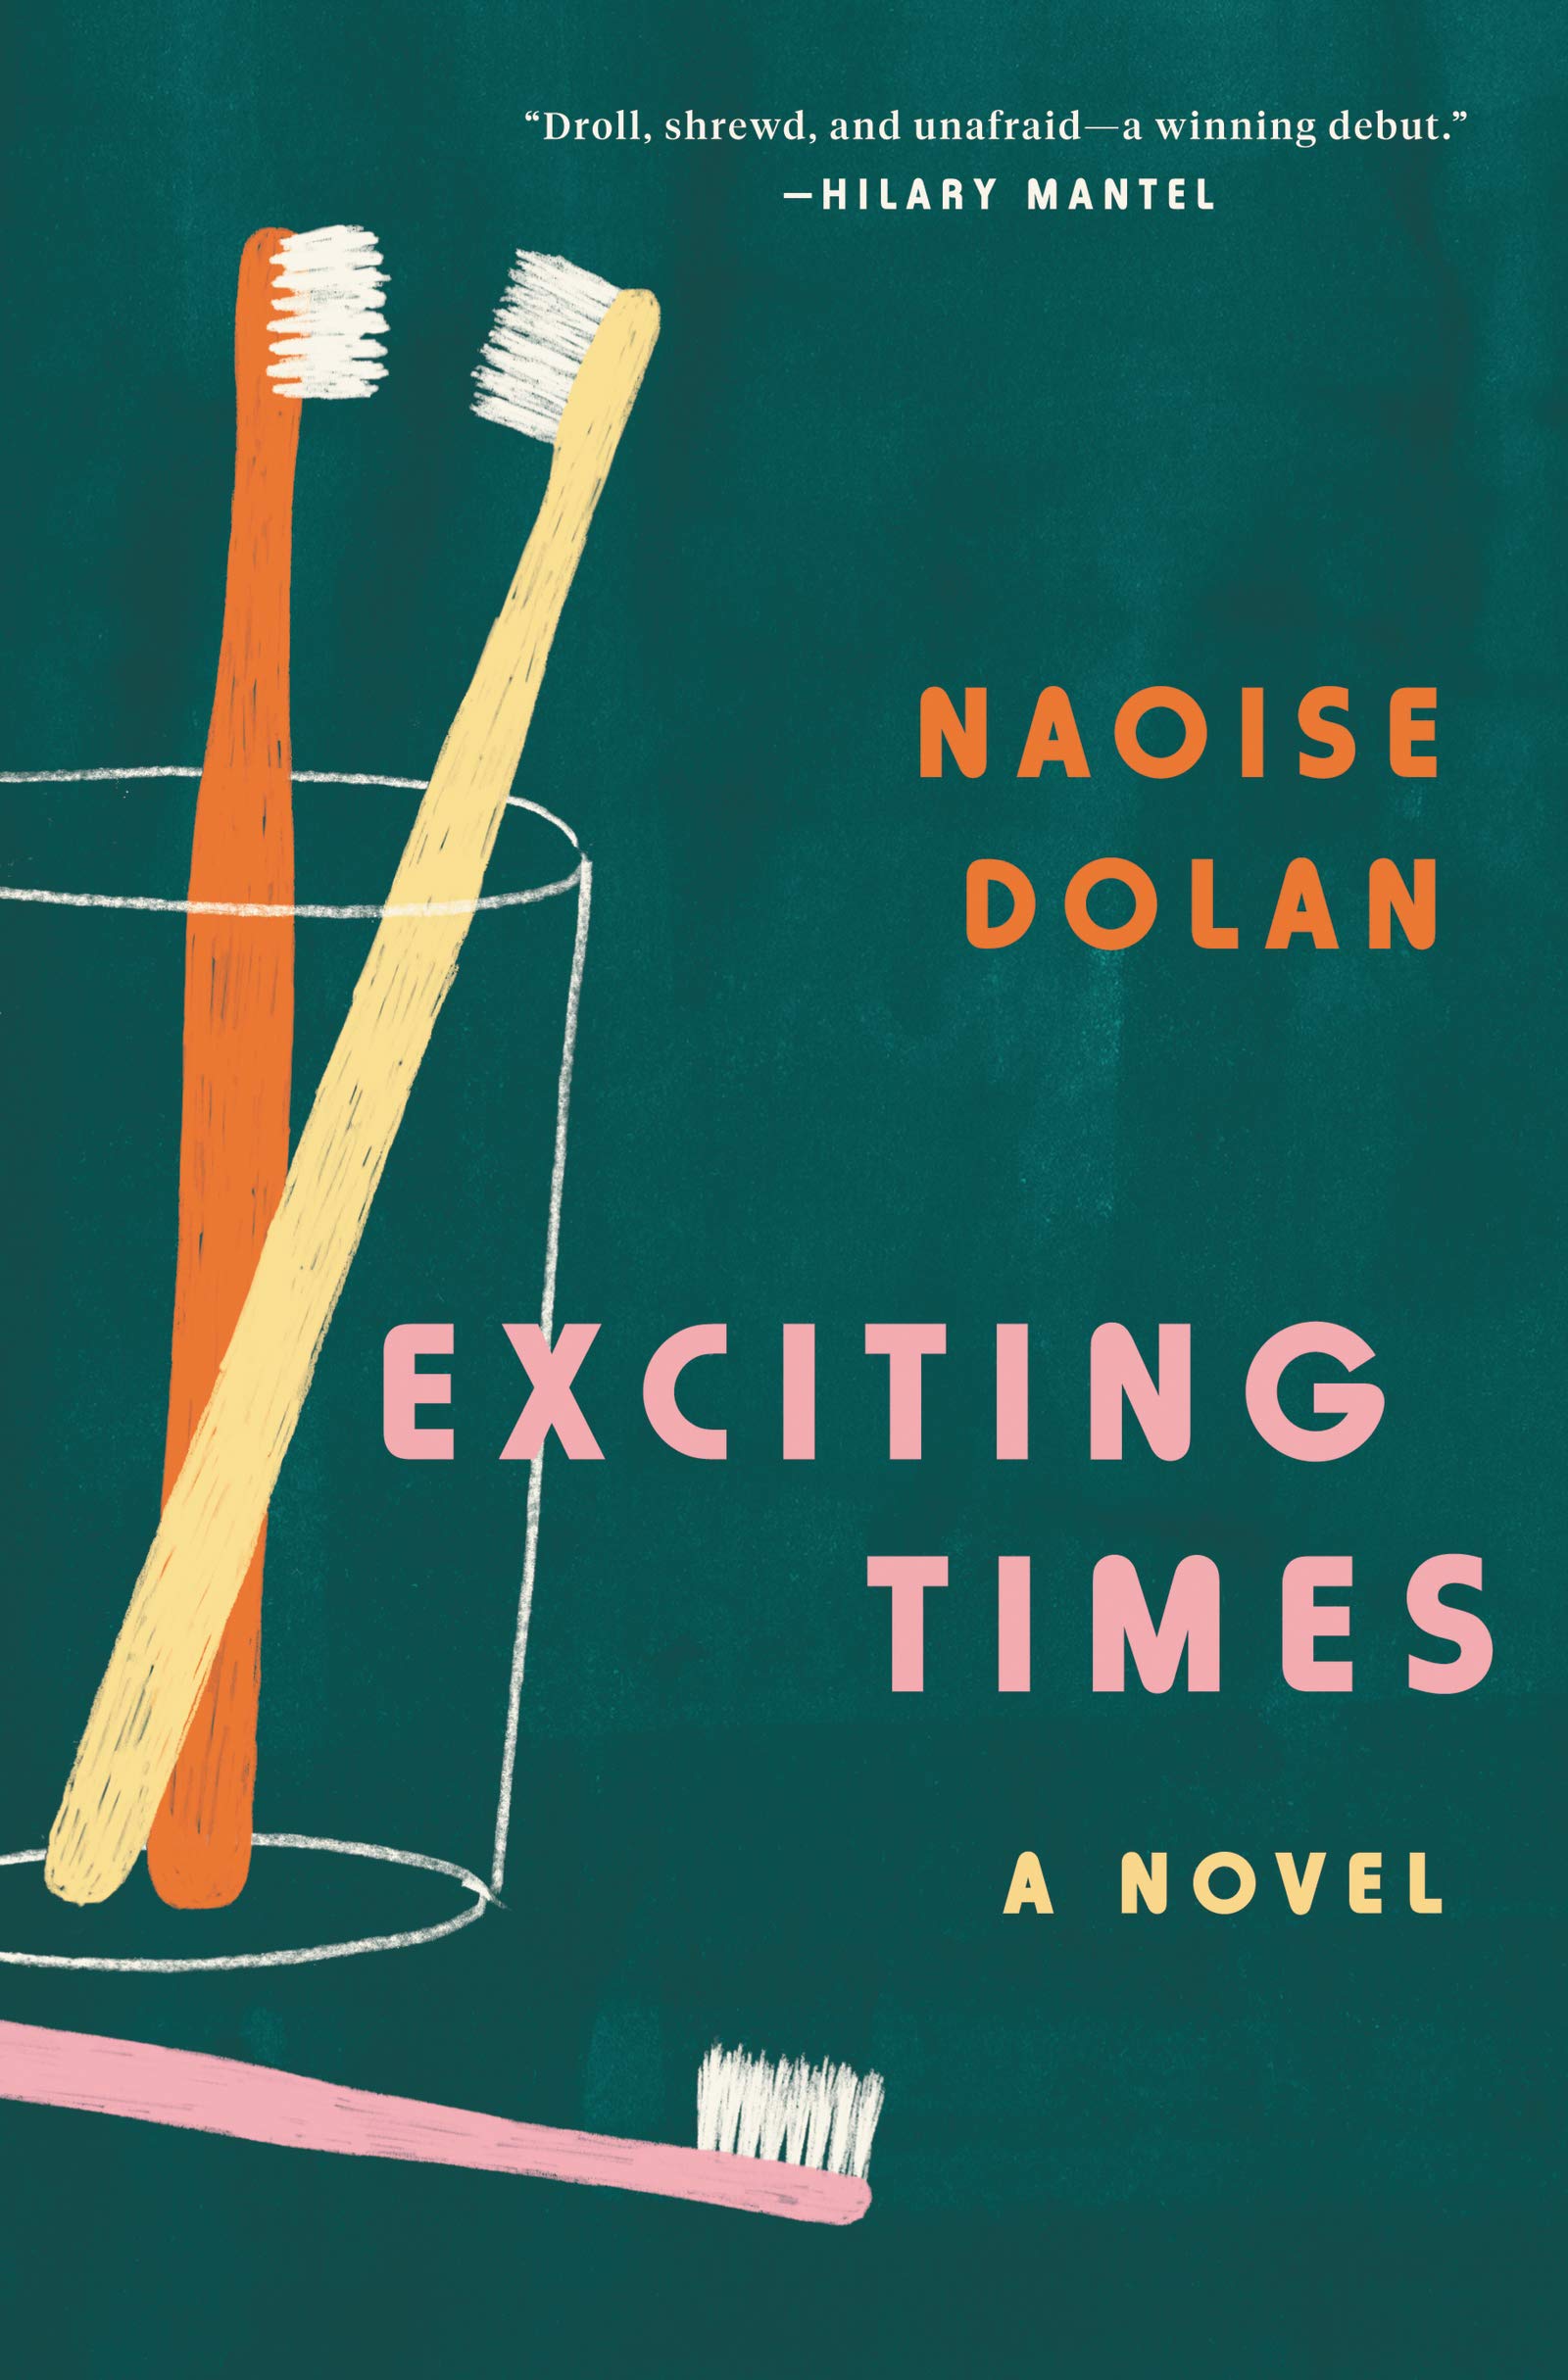 6. Exciting Times by Naoise Dolan